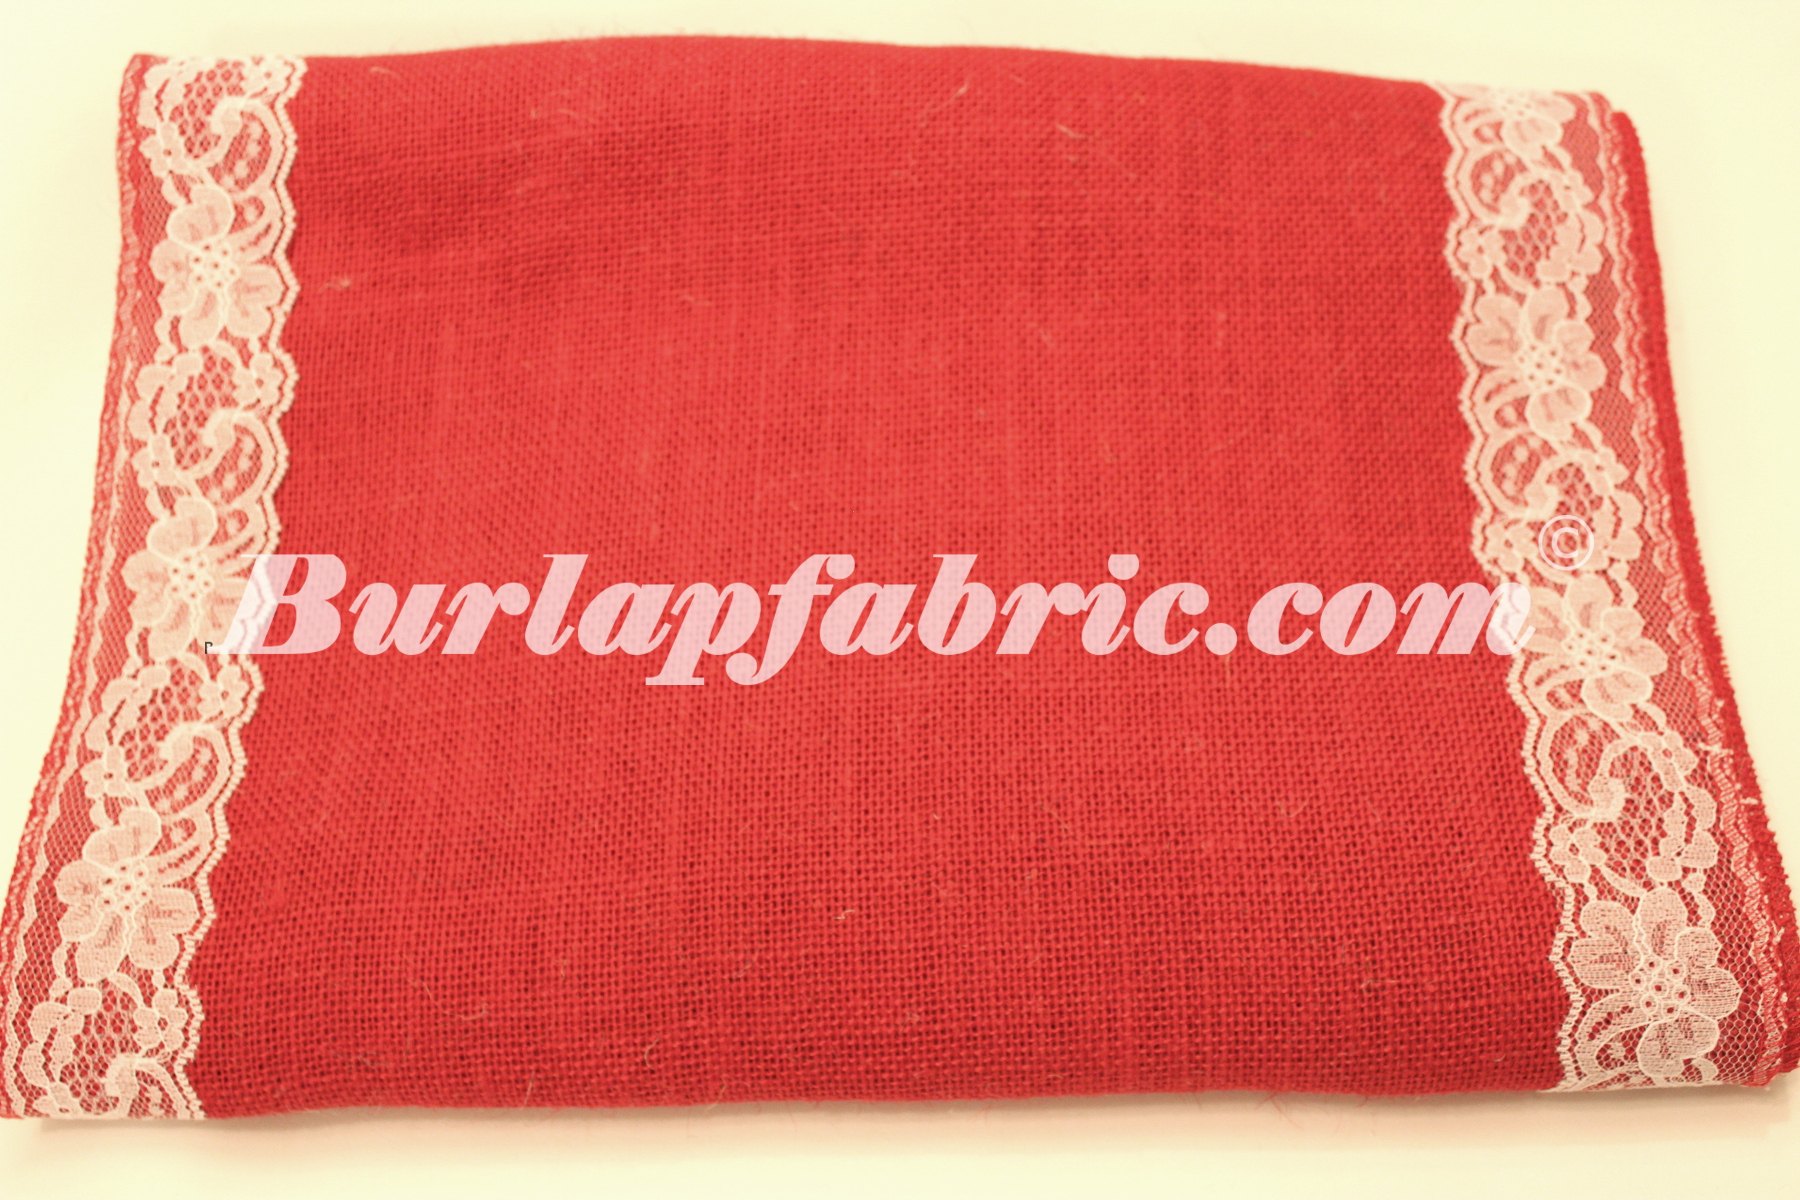 14" Red Burlap Runner with 2" White Lace Borders - Click Image to Close